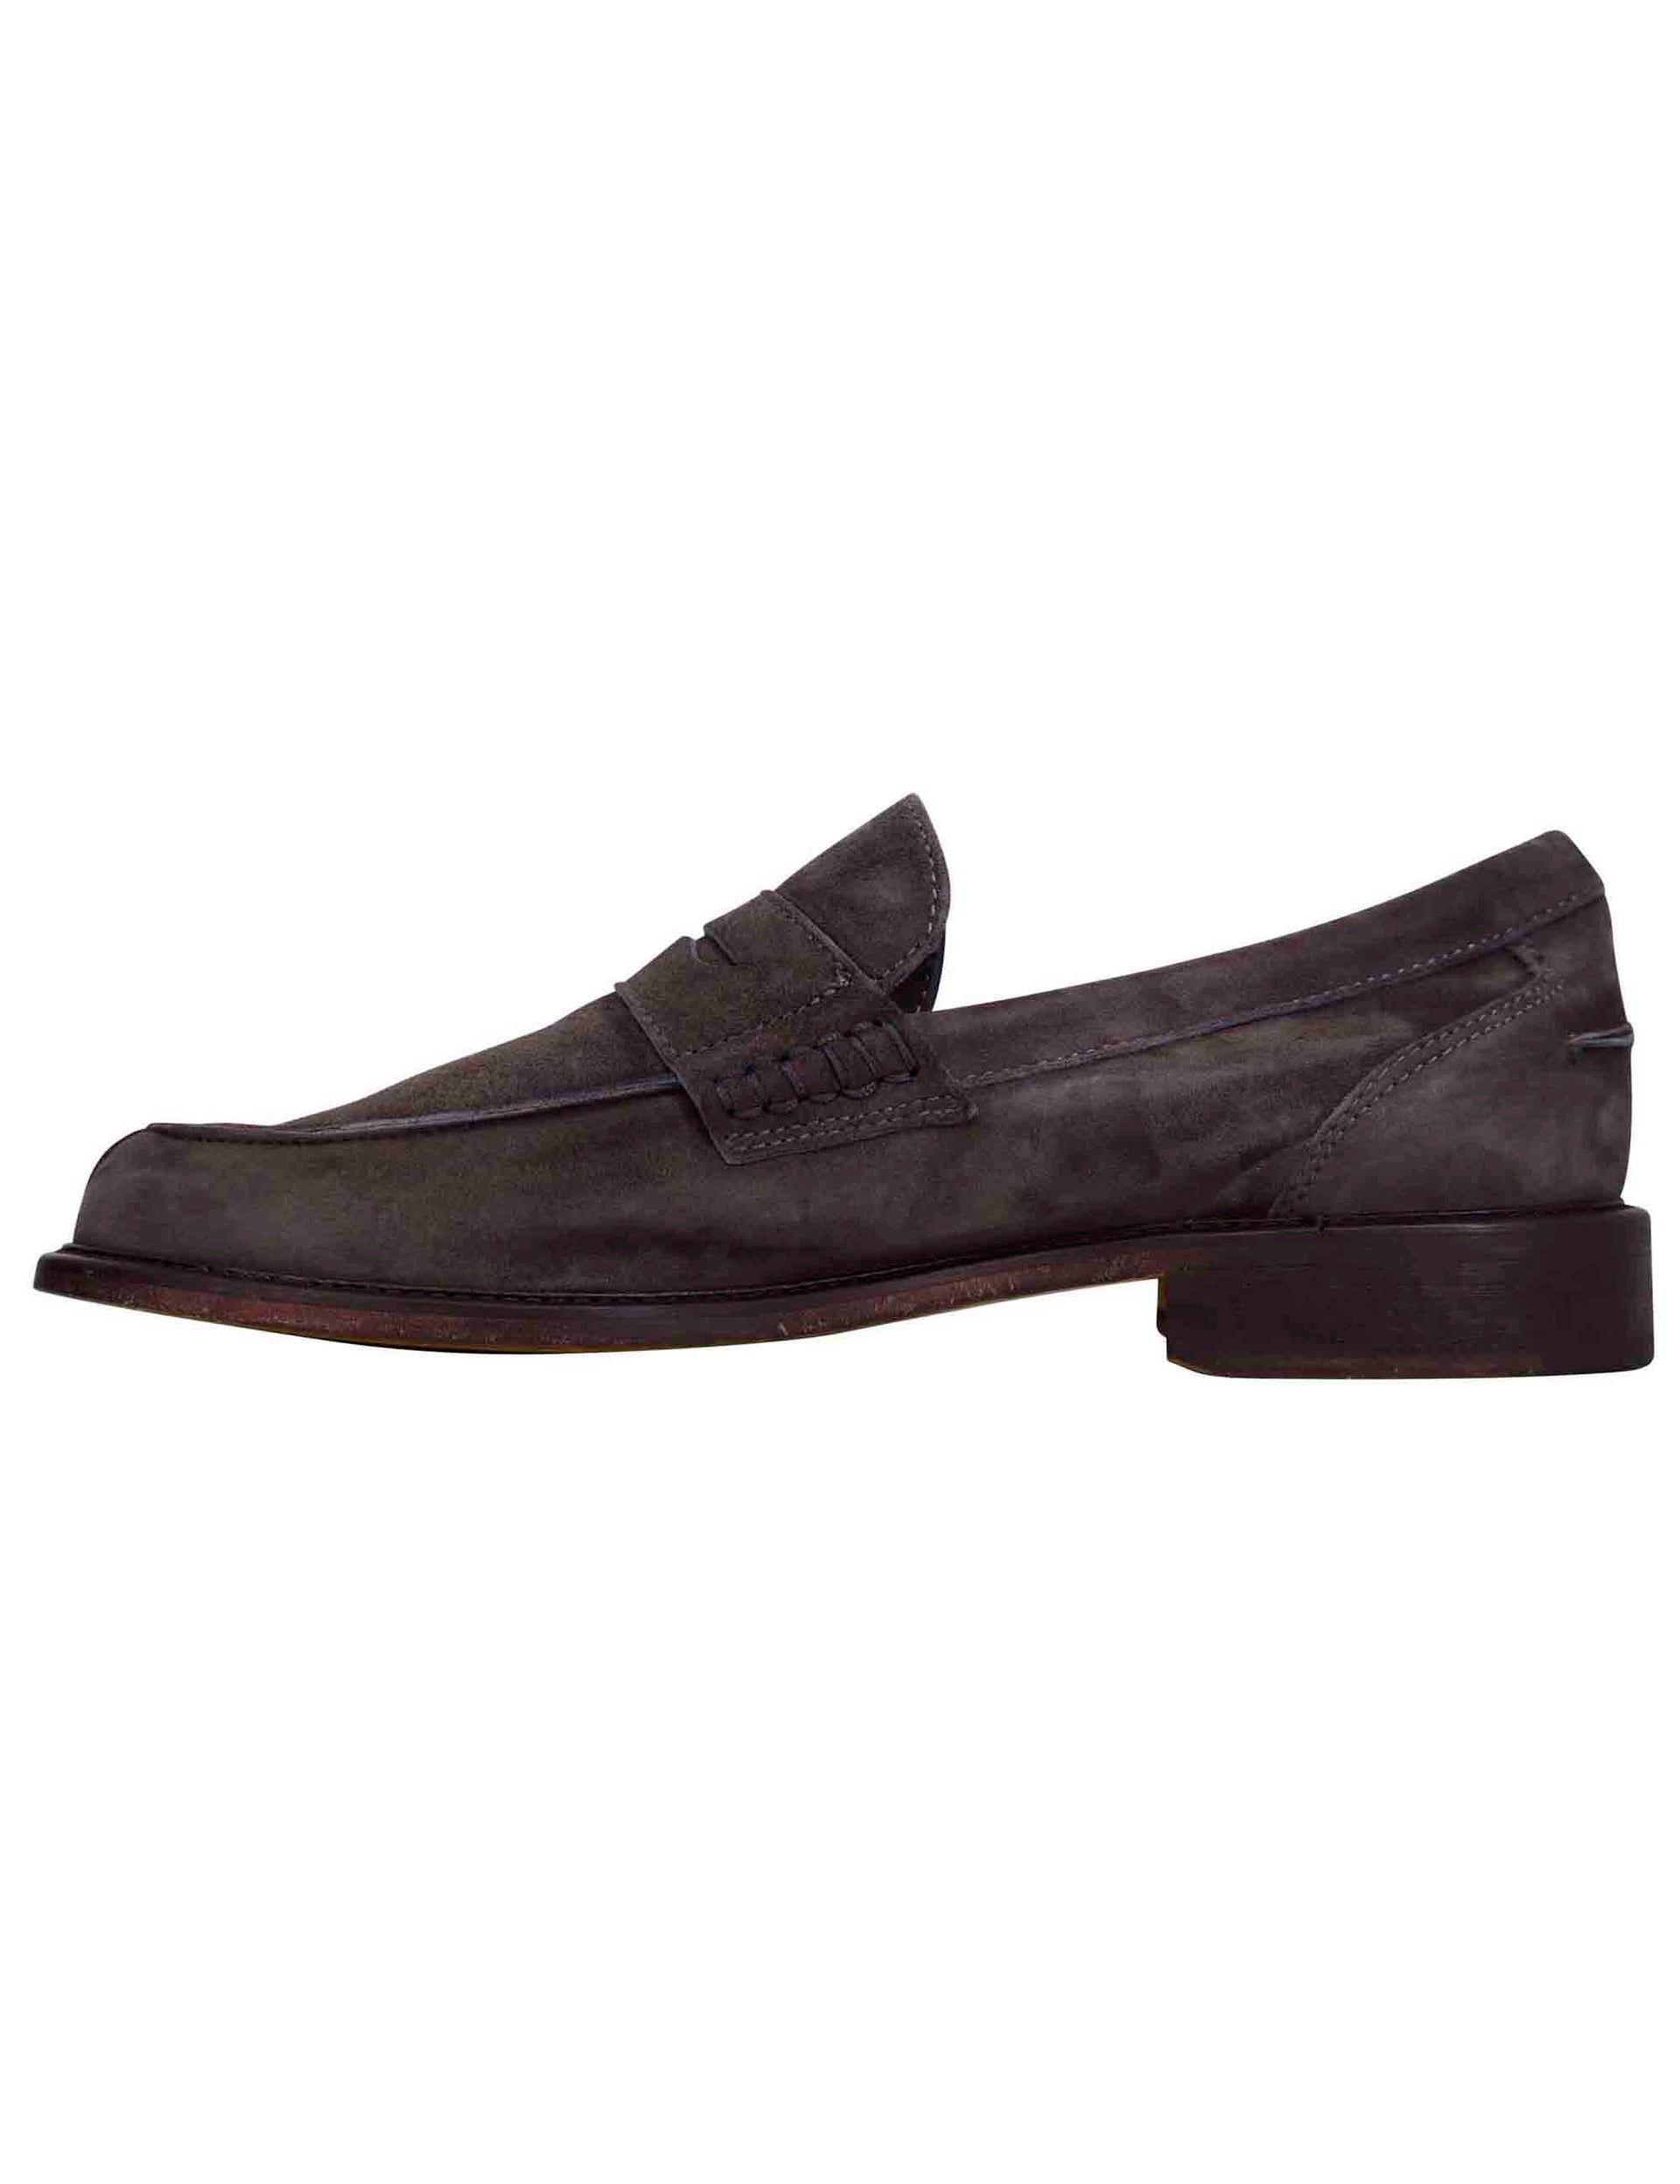 Men's moccasins in gray suede with stitched leather sole